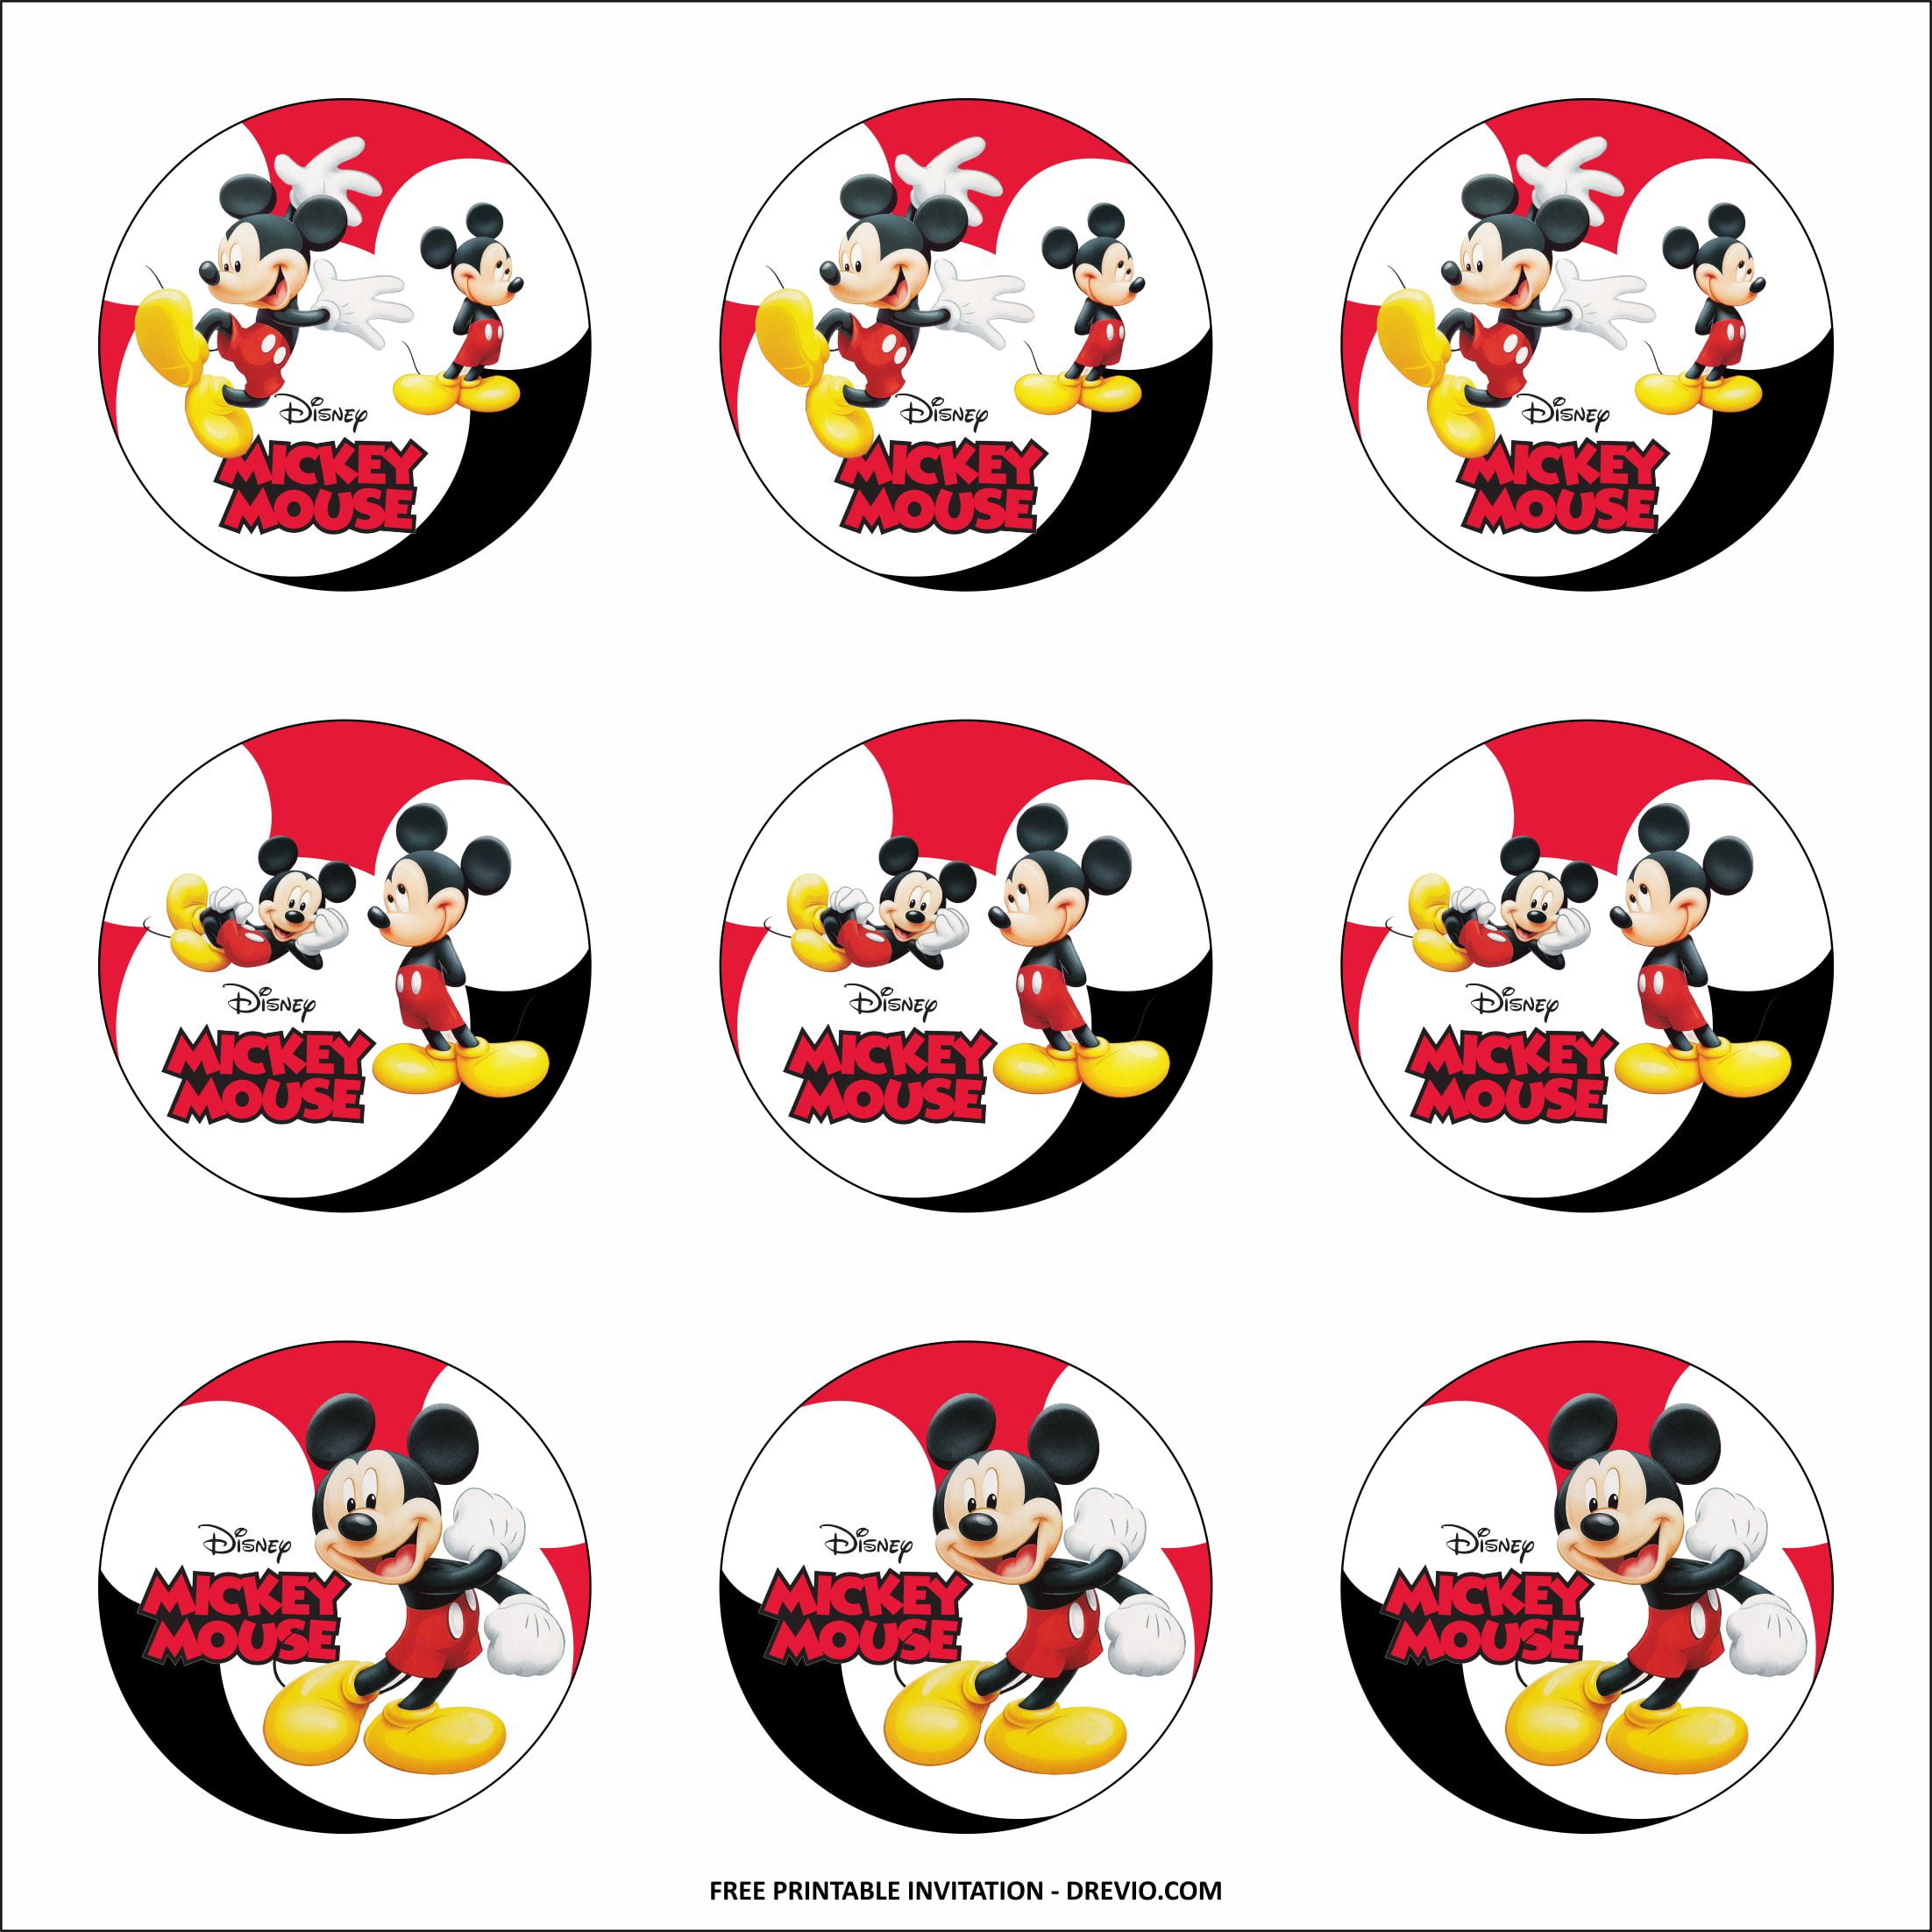 free-printable-mickey-mouse-birthday-party-kits-template-download